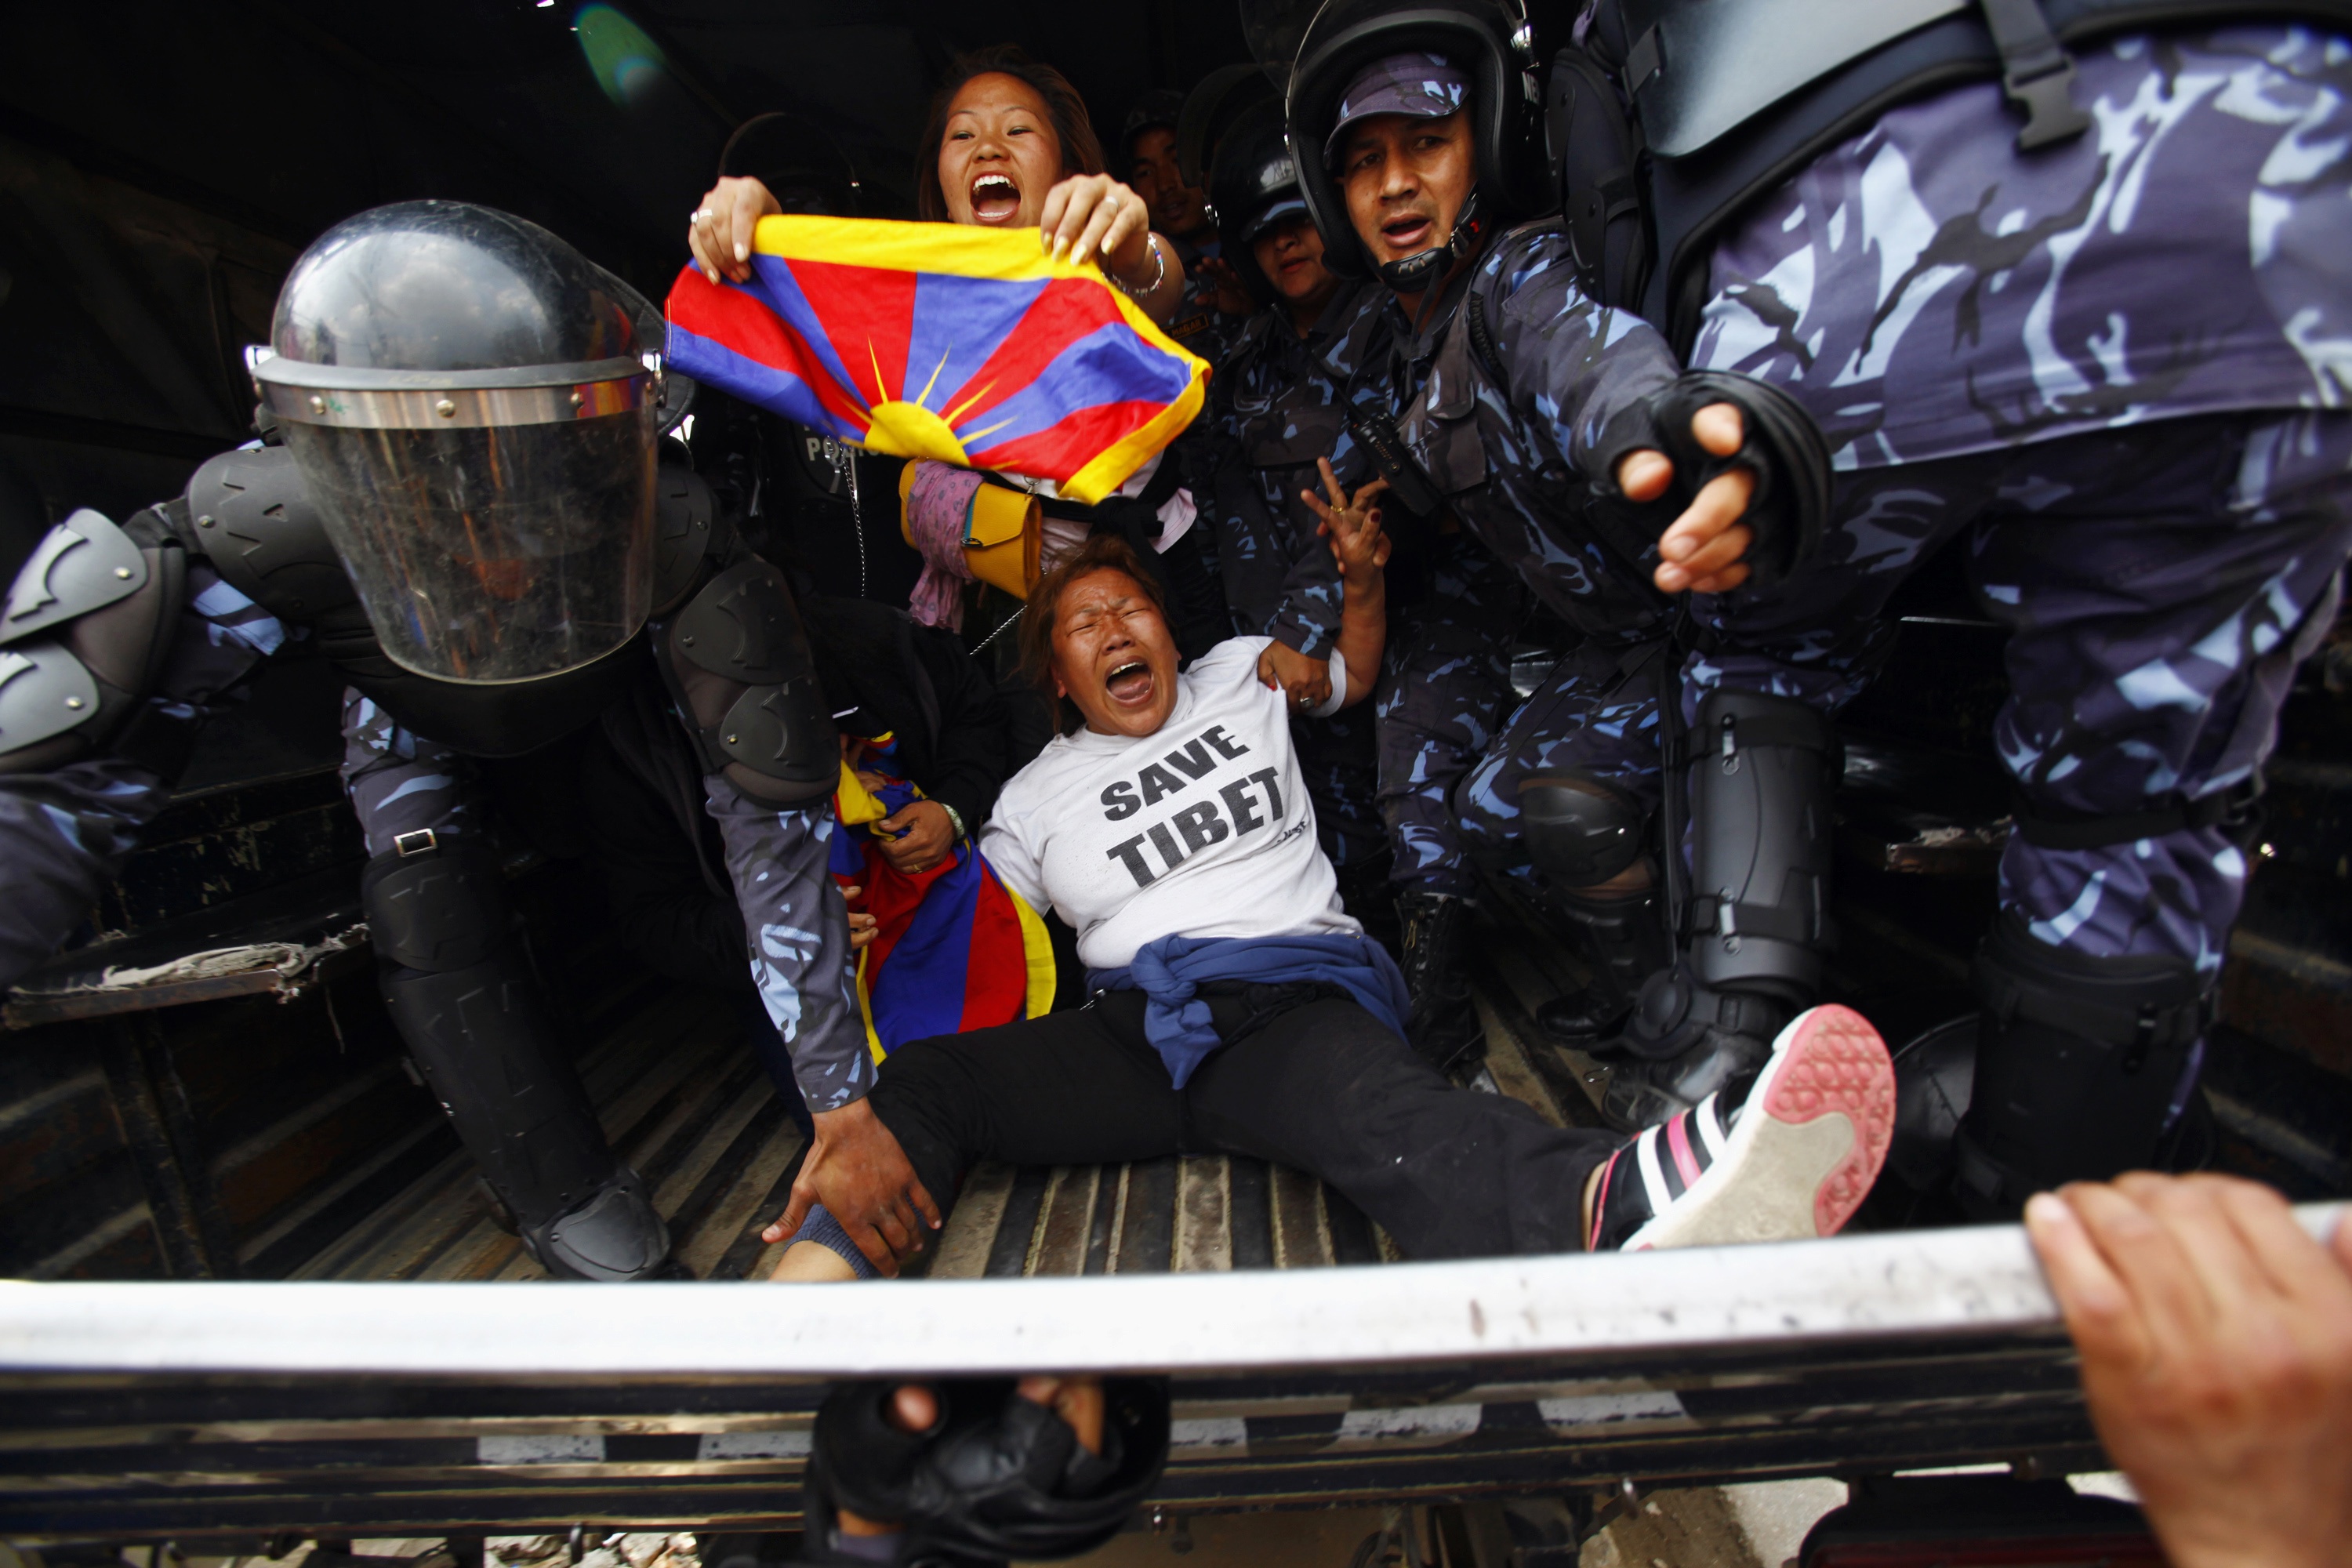 Nepali policemen detain exiled Tibetans participating in a protest outside the Chinese embassy in Kathmandu on March 10, 2014 (Niranjan Shrestha—Associated Press)